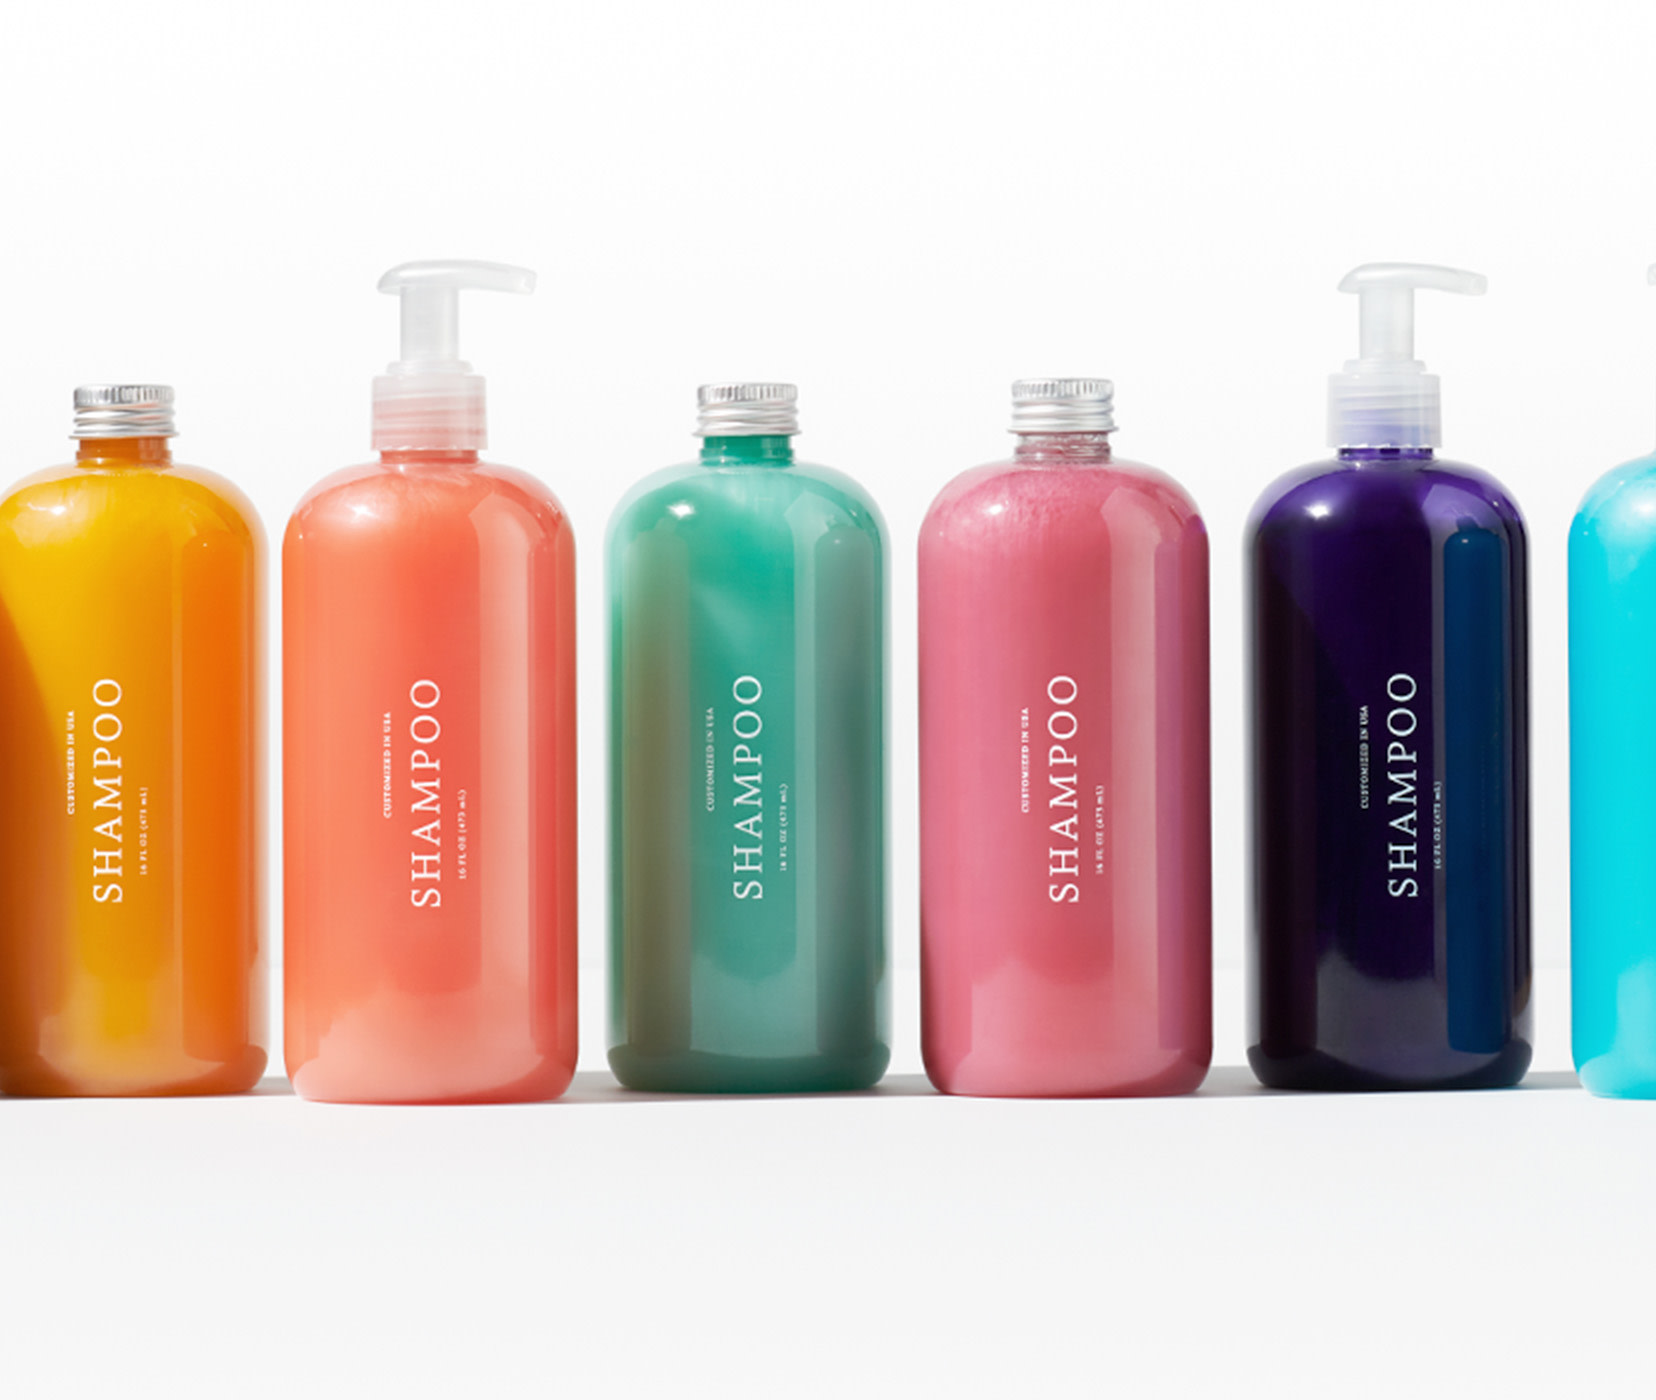 Customized shampoo bottles lined up next to each other. Shows bright colors of shampoo options in yellow, orange, green, pink, dark purple and ocean blue. 